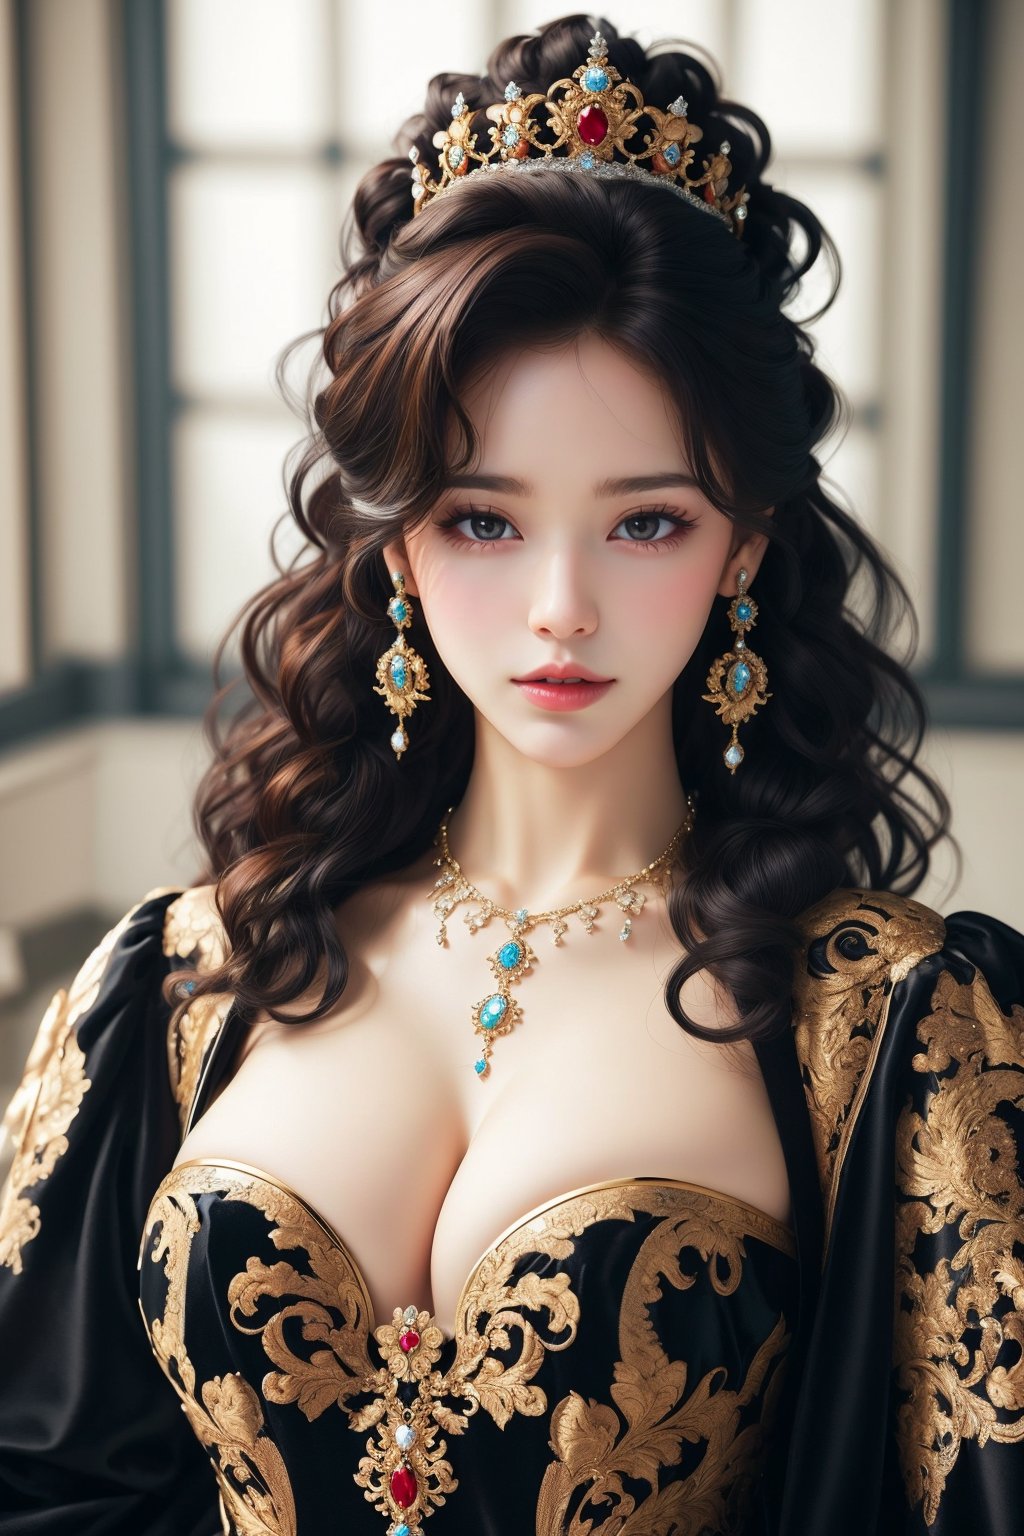 busty and sexy girl, 8k, masterpiece, ultra-realistic, best quality, high resolution, high definition, Curly hair, diamond crown, diamond earrings, diamond necklace, black low-cut princess dress, intricate pattern, black smoky eyeliner 